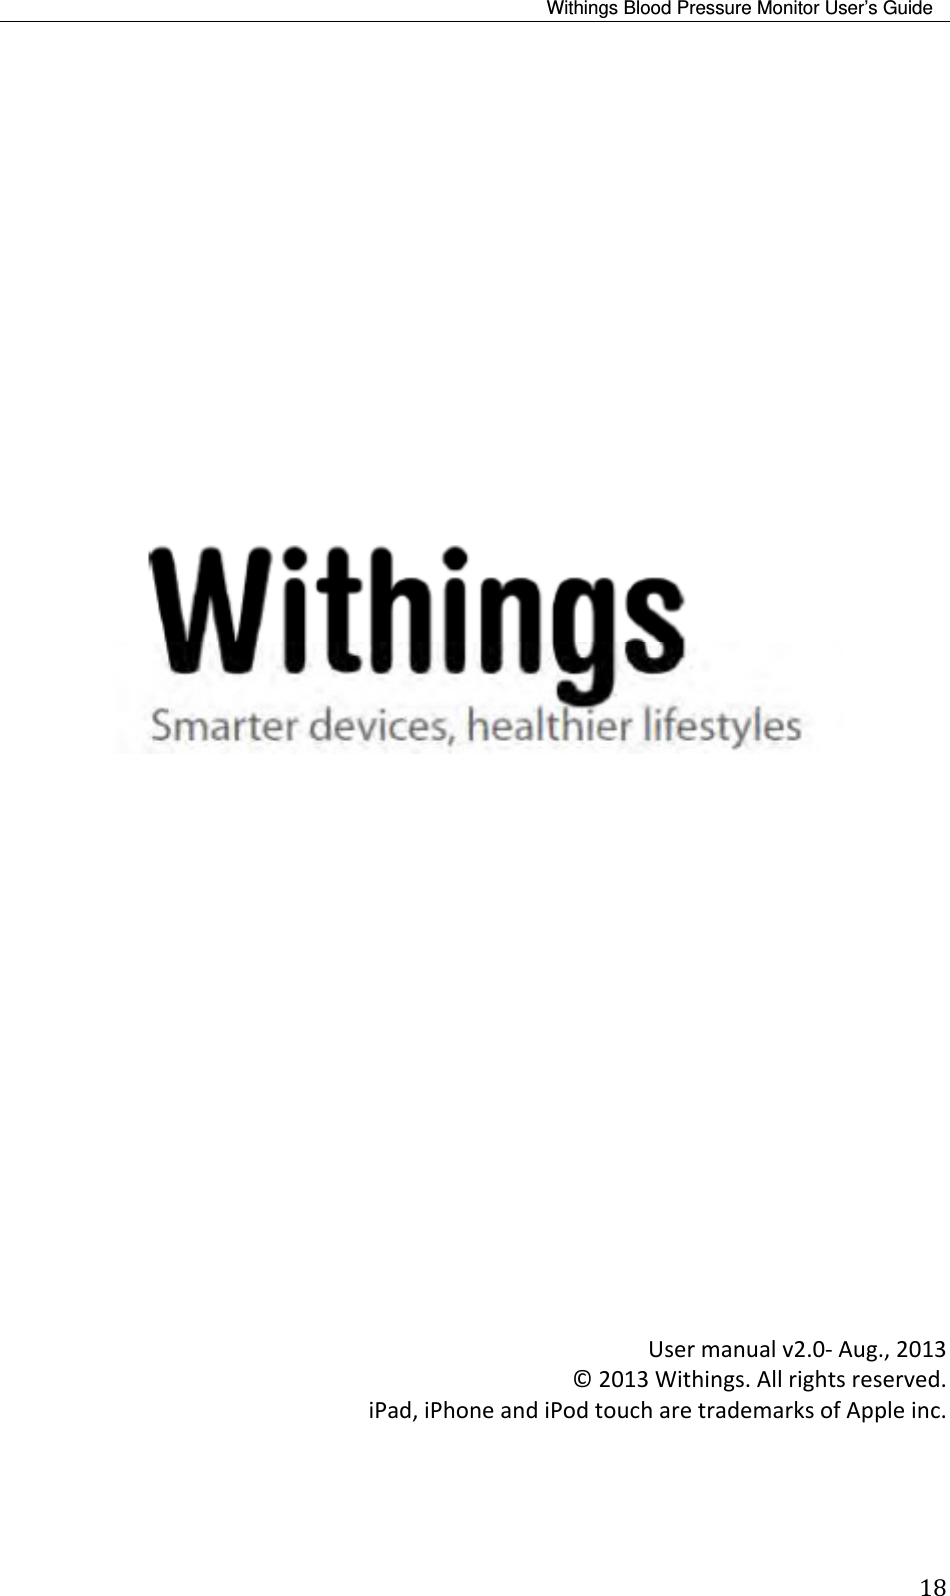 Withings Blood Pressure Monitor User’s Guide 18Usermanualv2.0‐Aug.,2013©2013Withings.Allrightsreserved.iPad,iPhoneandiPodtoucharetrademarksofAppleinc.